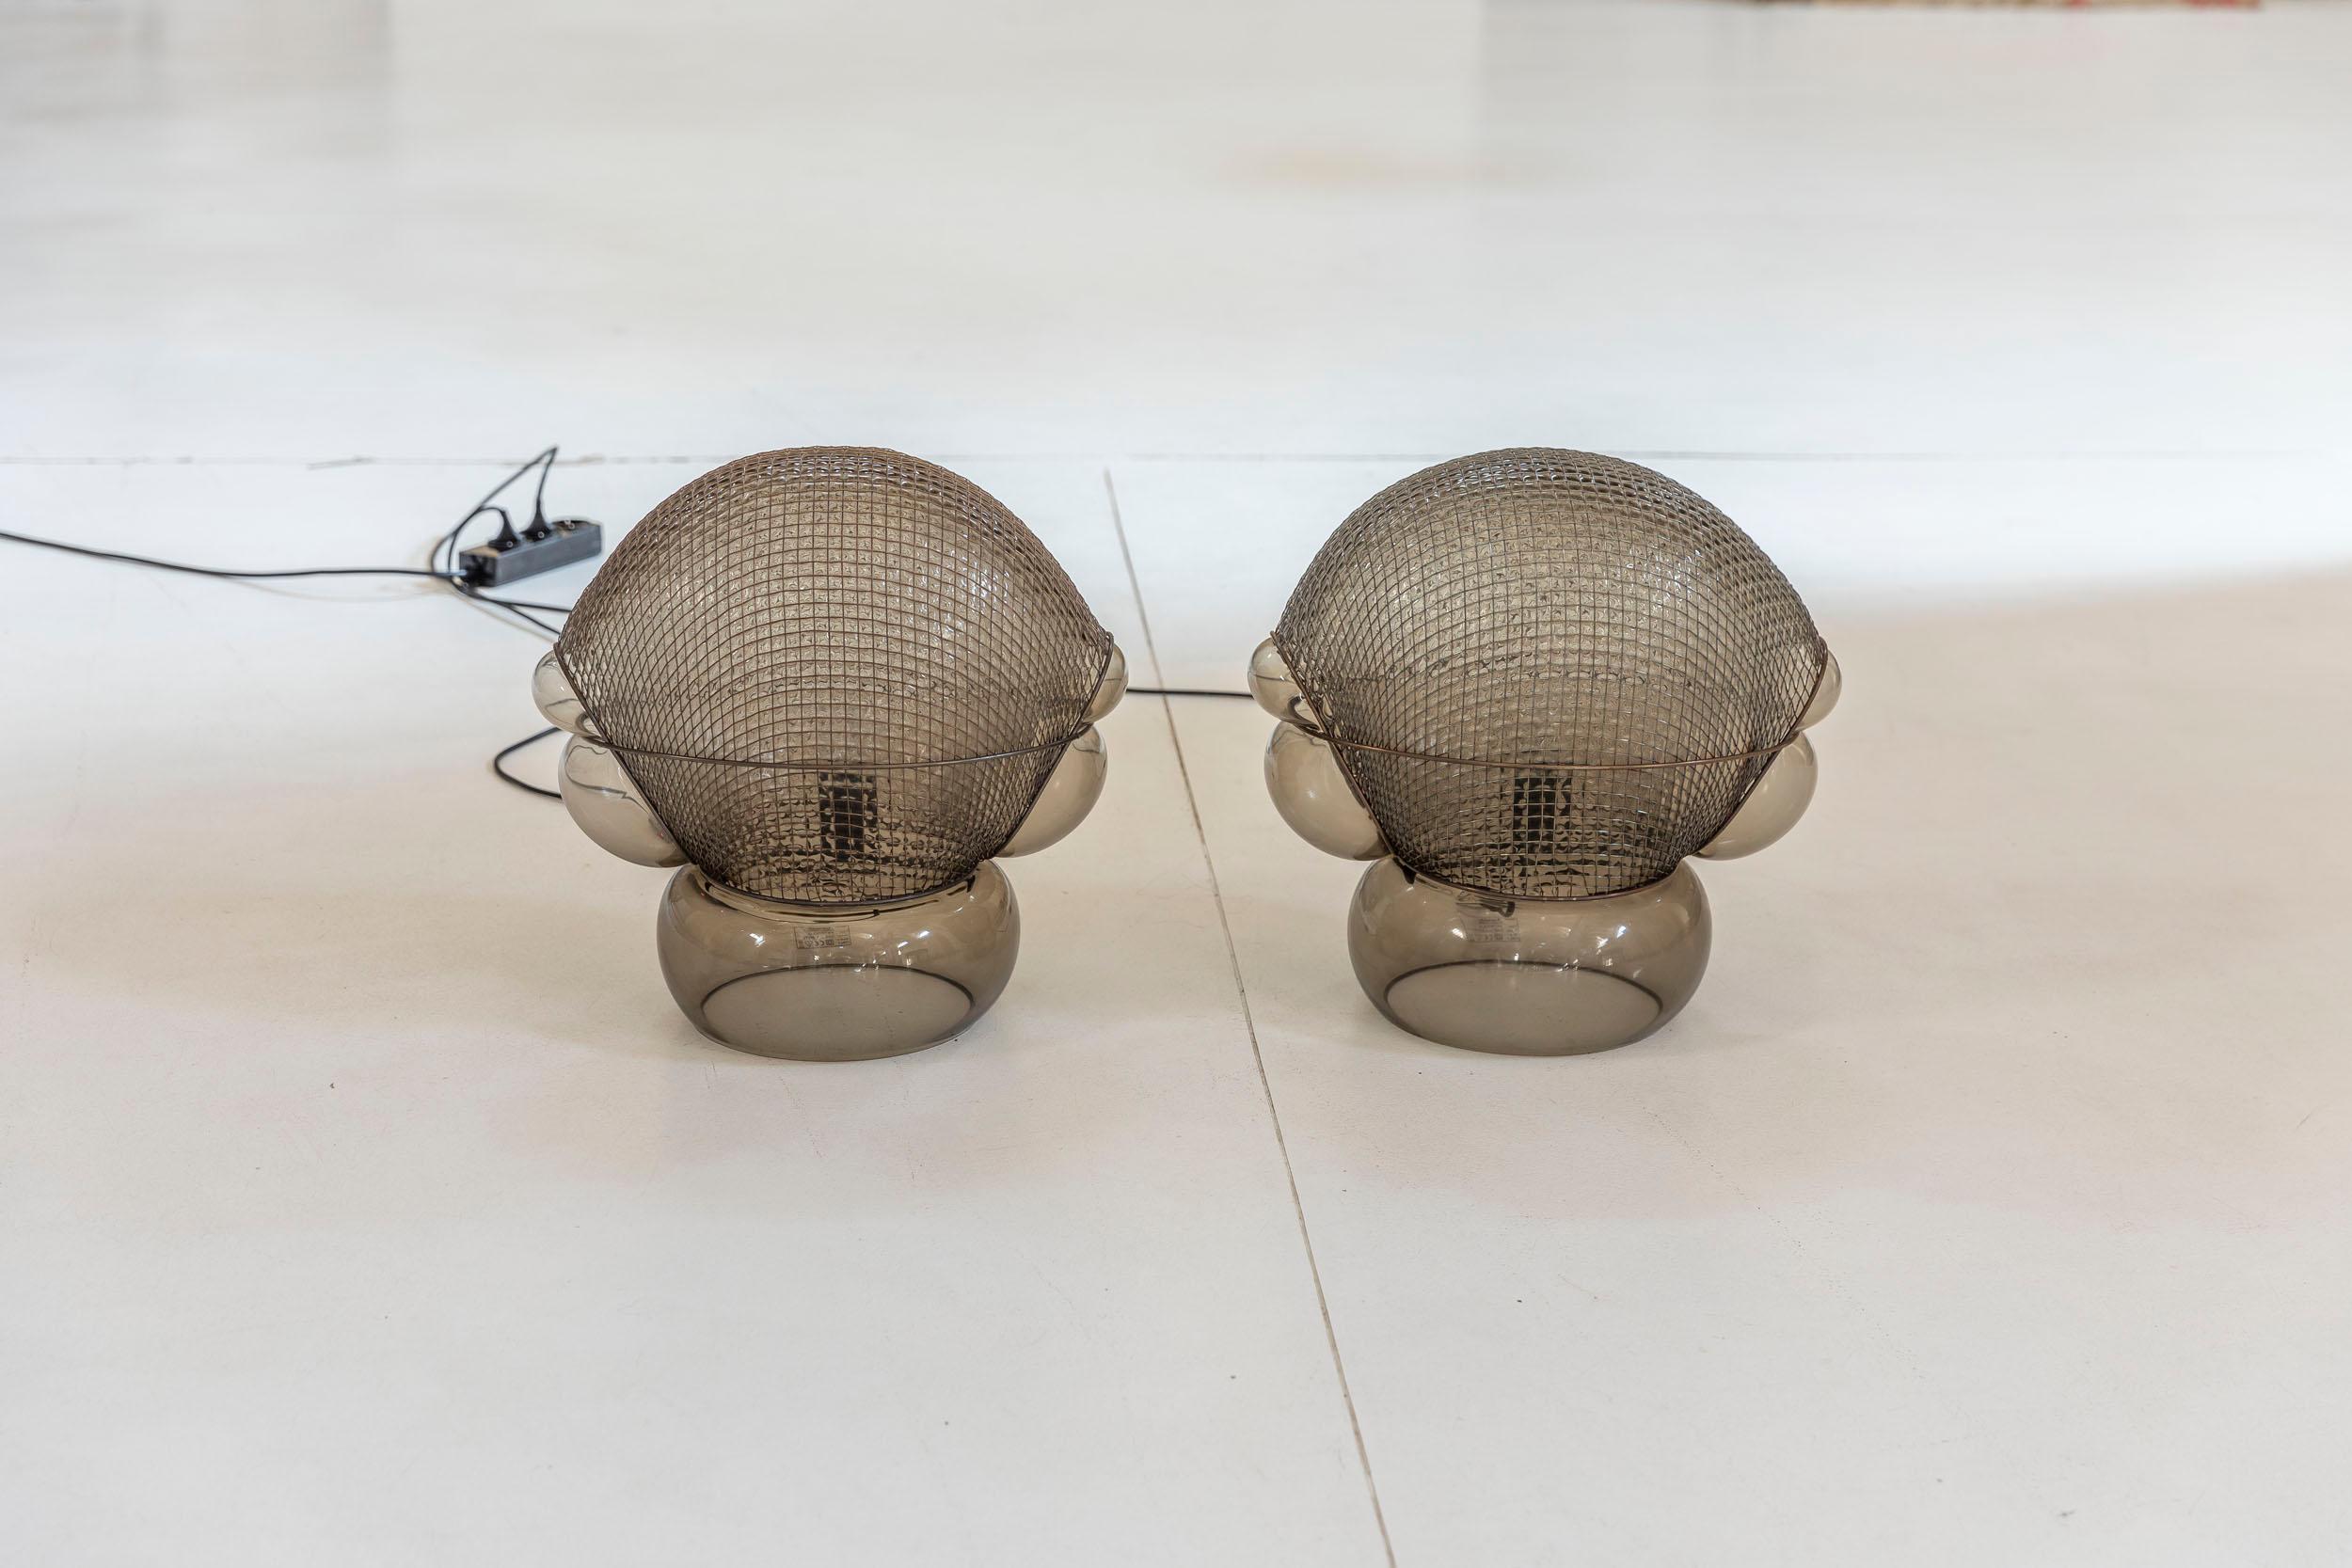 Late 20th Century Pair of Patroclo Table Lamps  by Gae Aulenti for Artemide